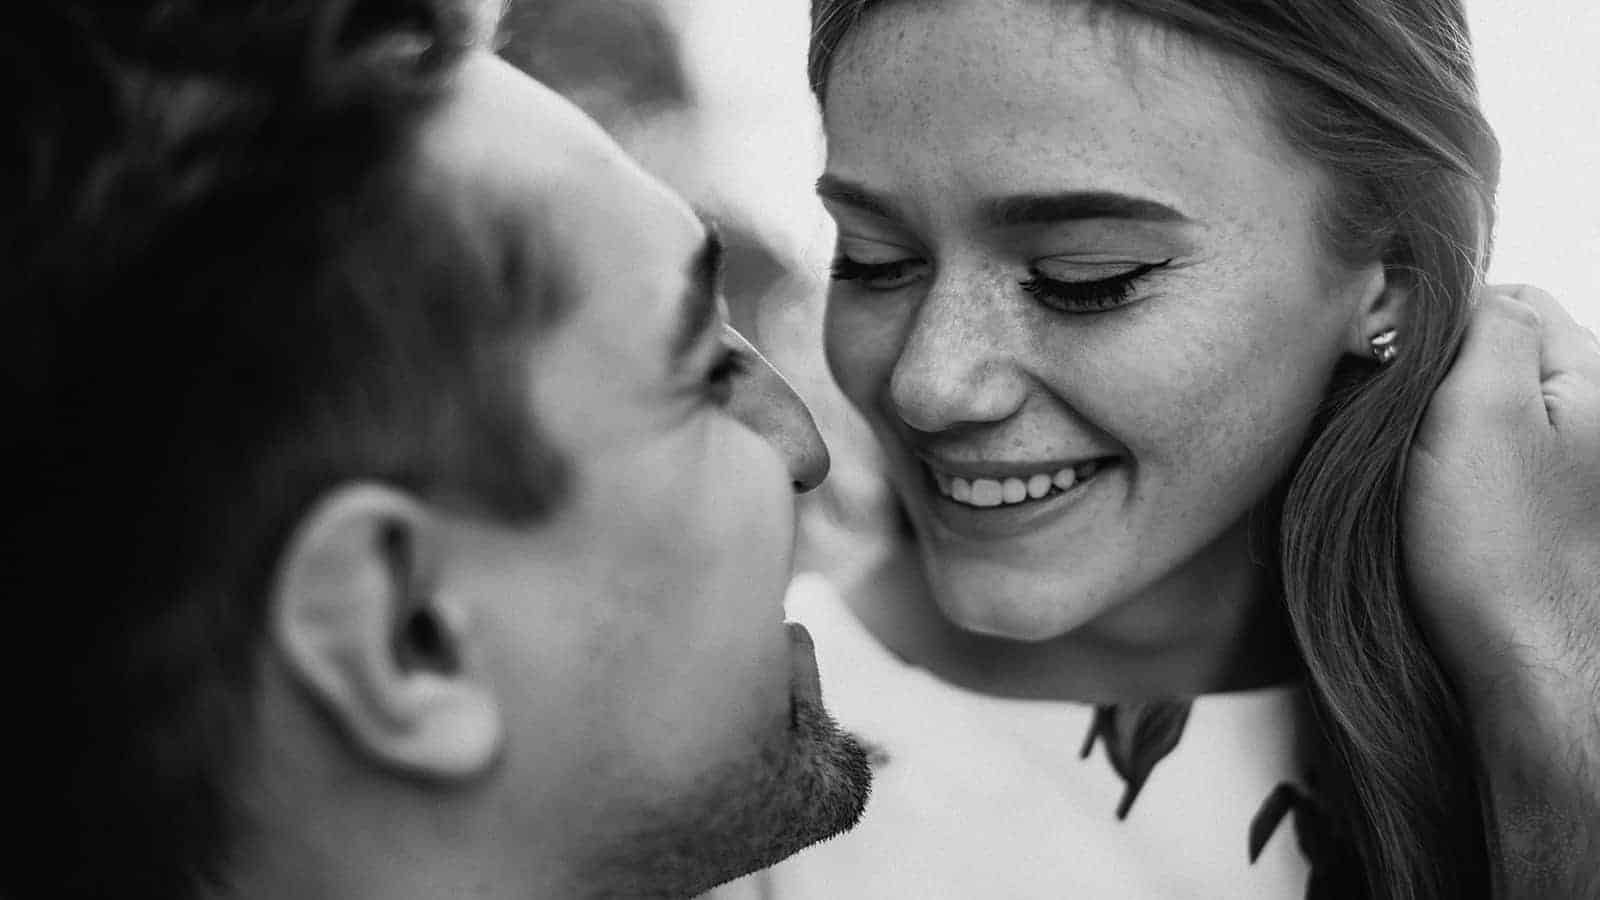 15 Habits That Build Mutual Respect in a Romantic Relationship